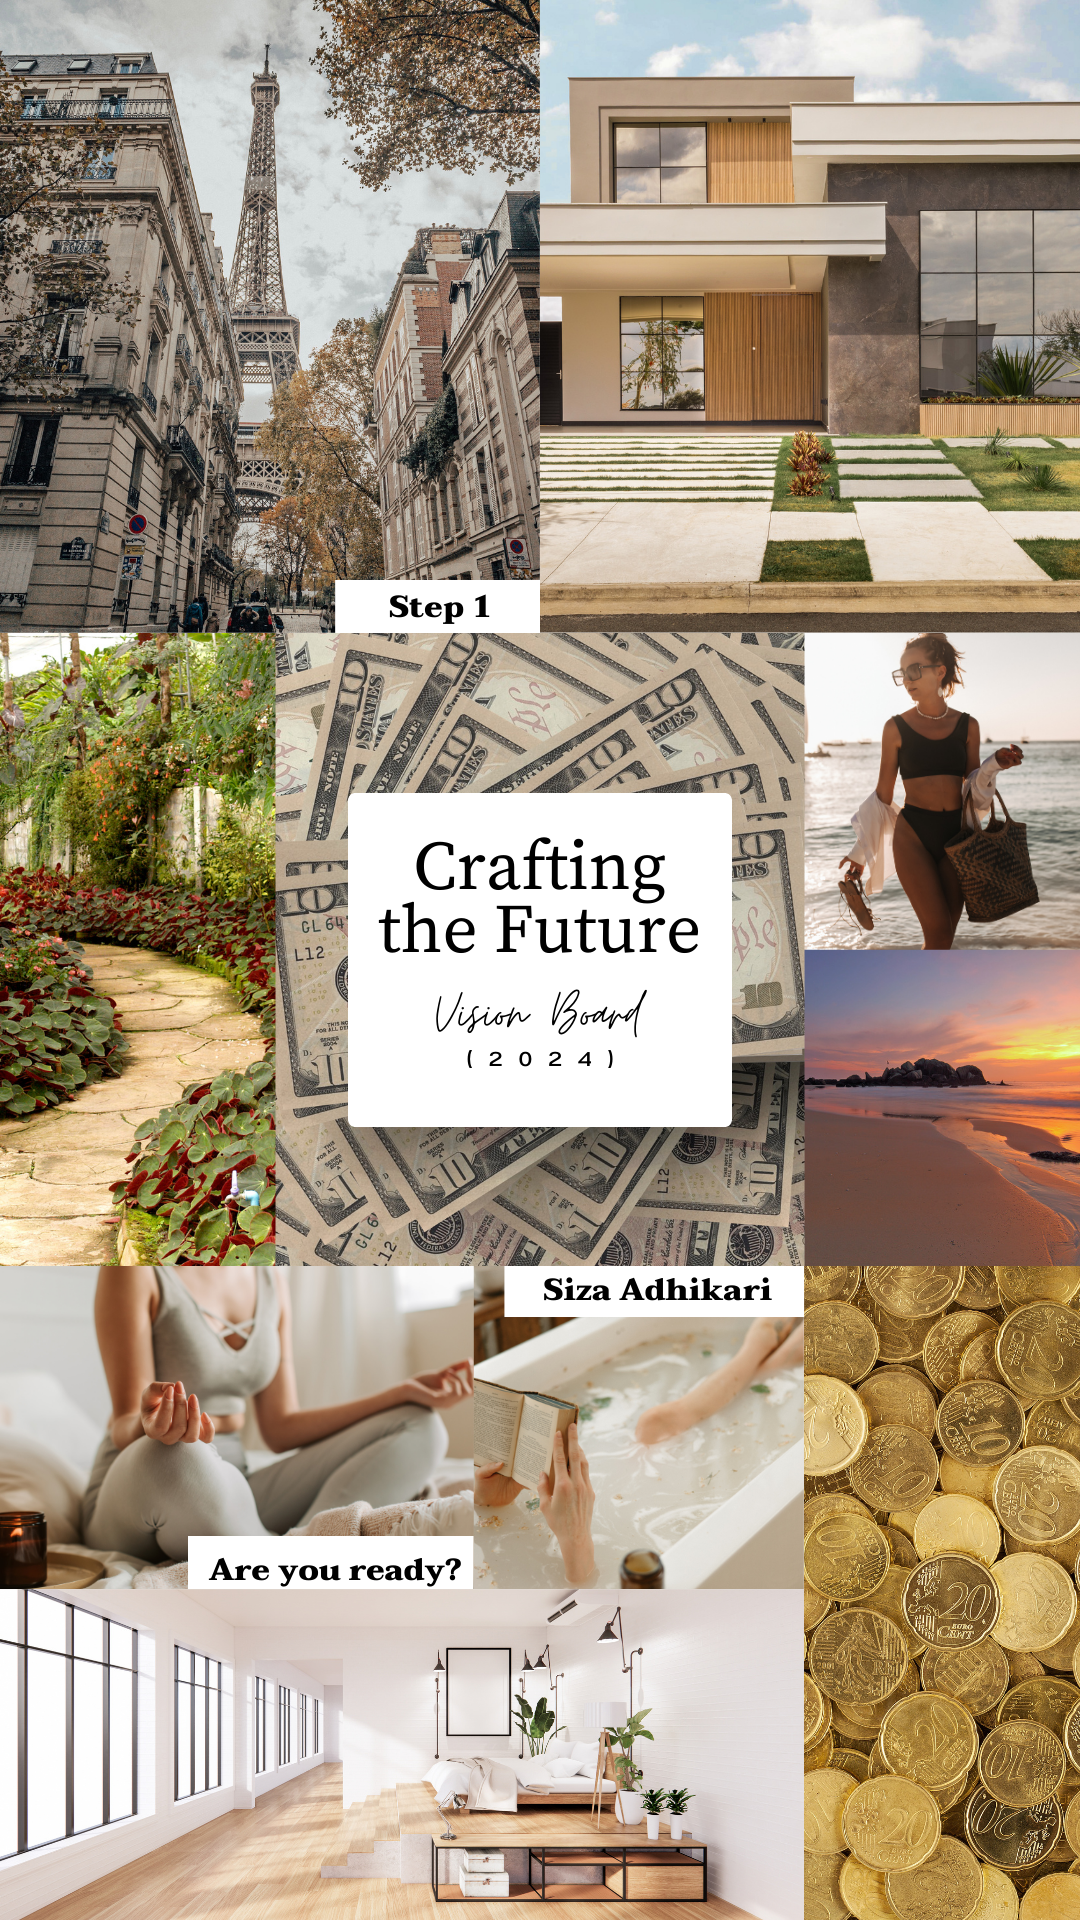 Crafting Your Future: A Step-by-Step Guide to Making a Vision